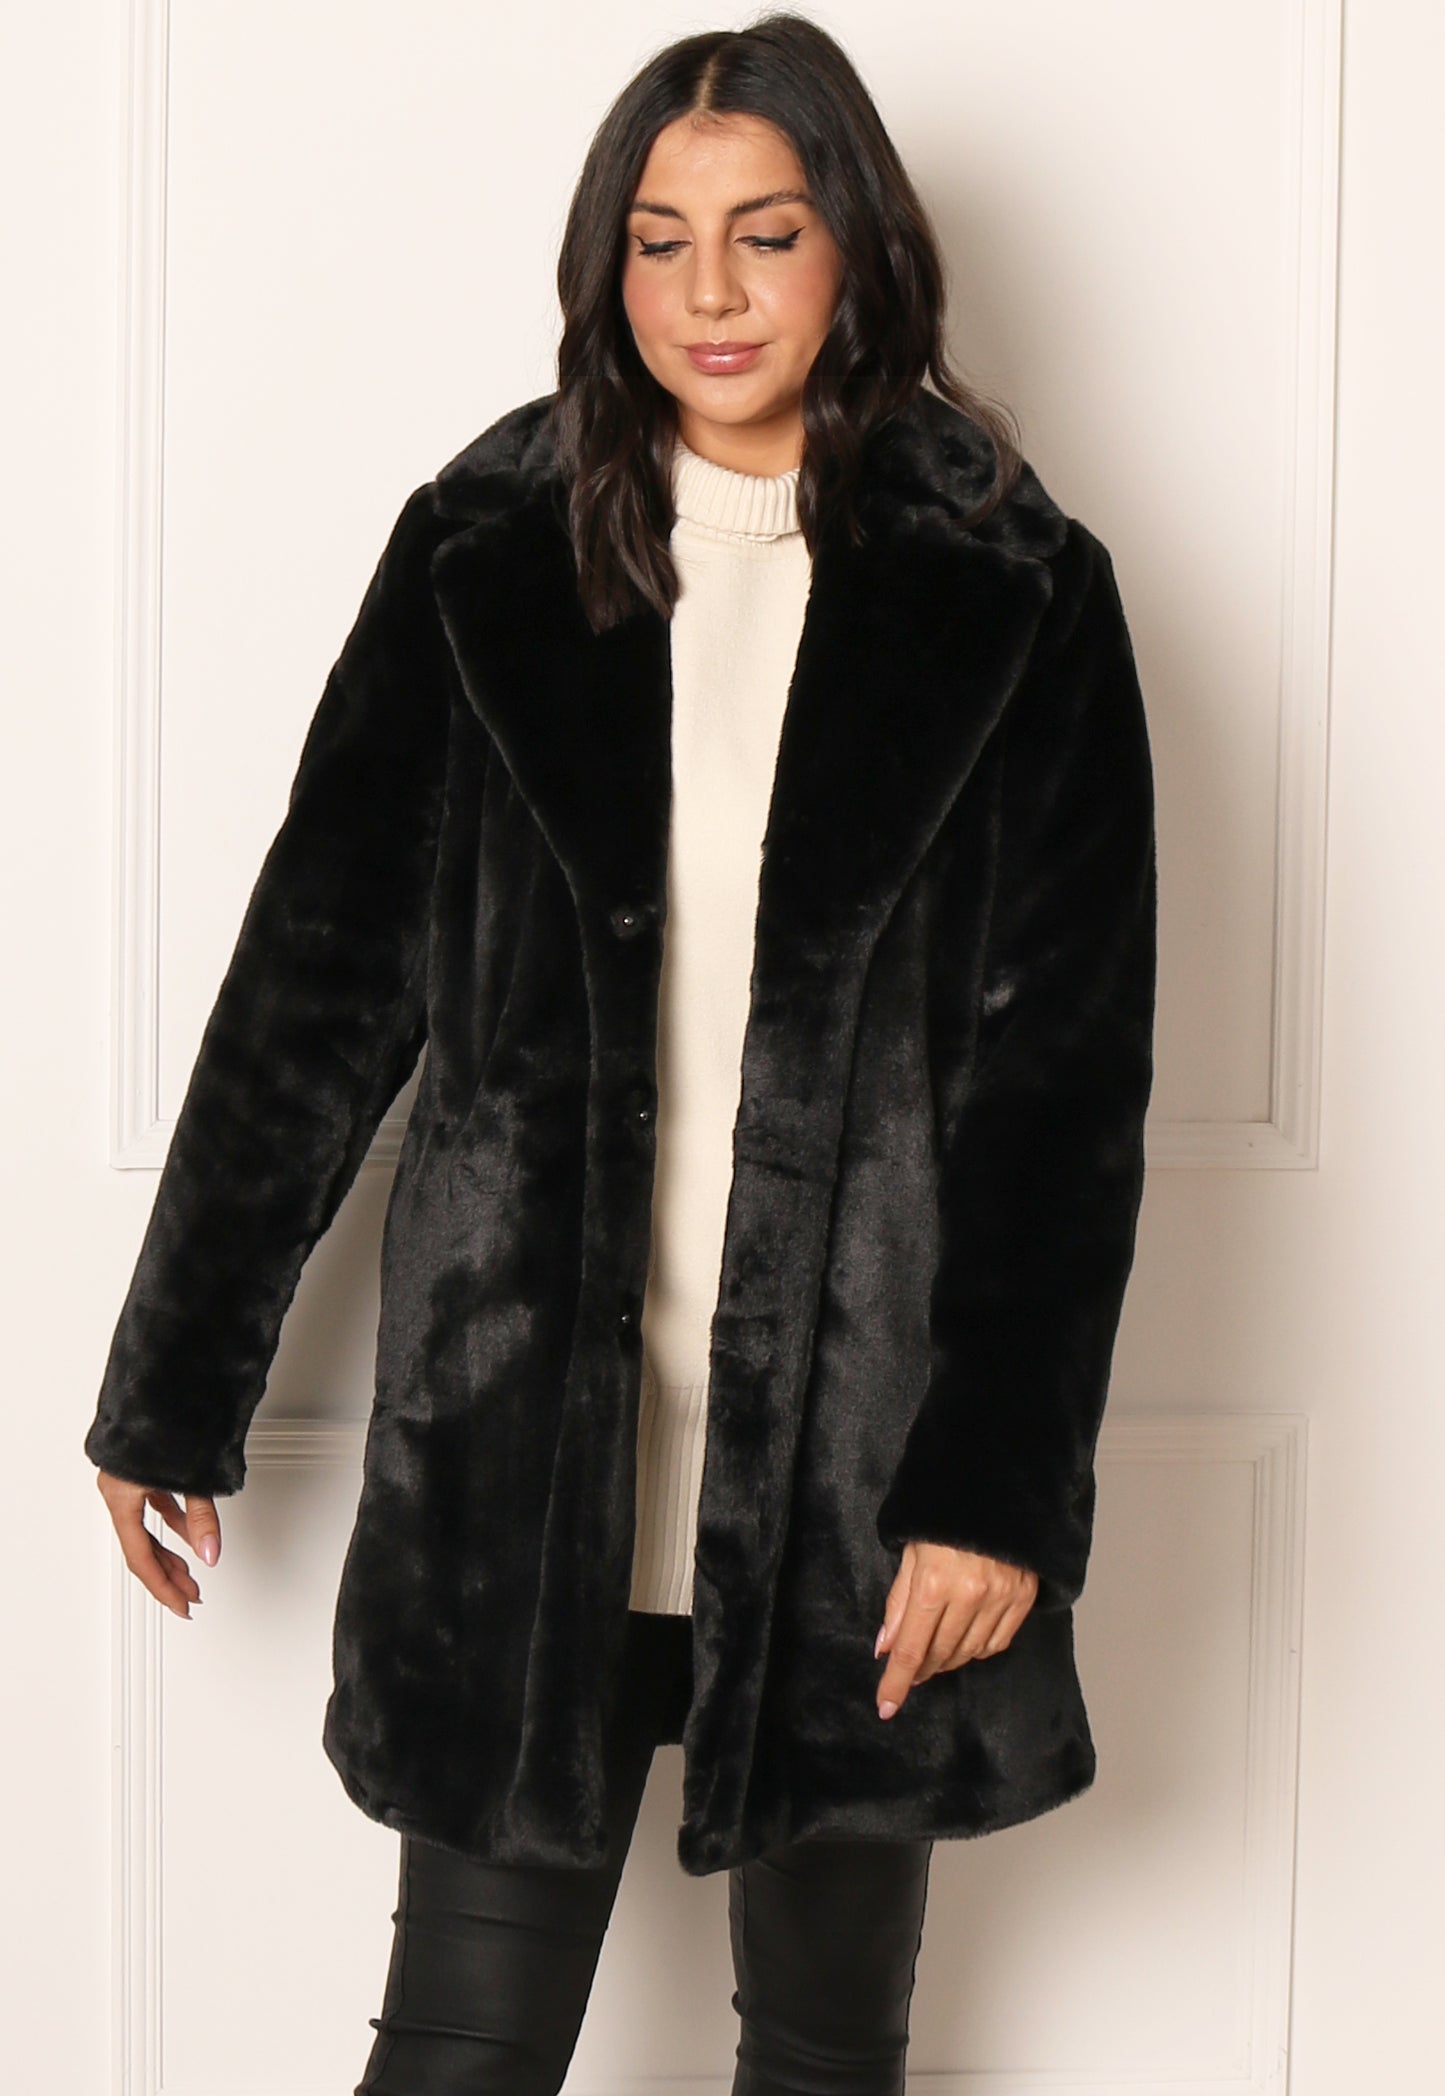 VILA New Ebba Vintage Style Faux Fur Midi Coat with Collar in Black - One Nation Clothing